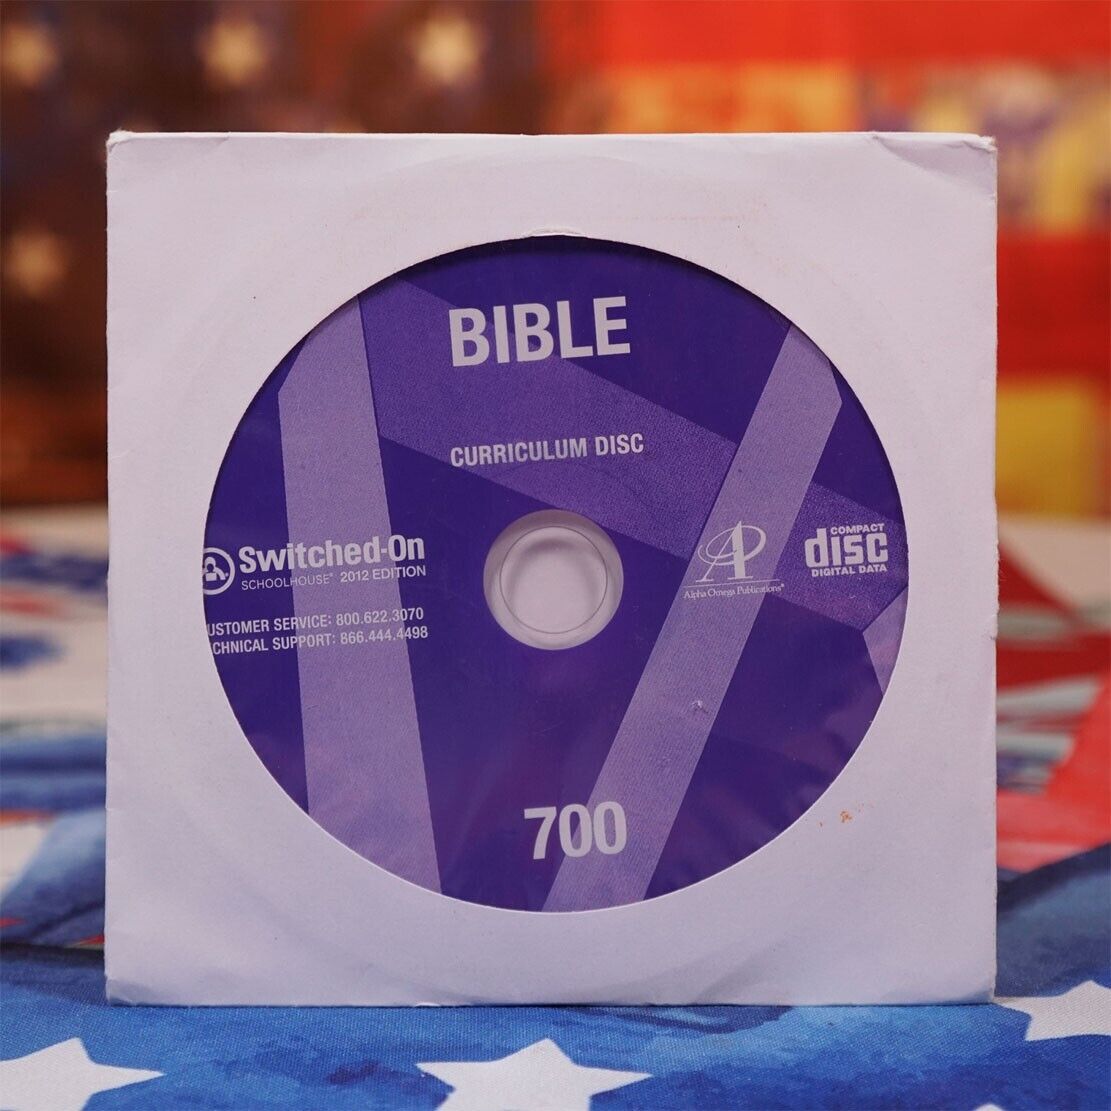 SWITCHED-ON SCHOOLHOUSE BIBLE 700 7TH GRADE CURRICULUM DISC 